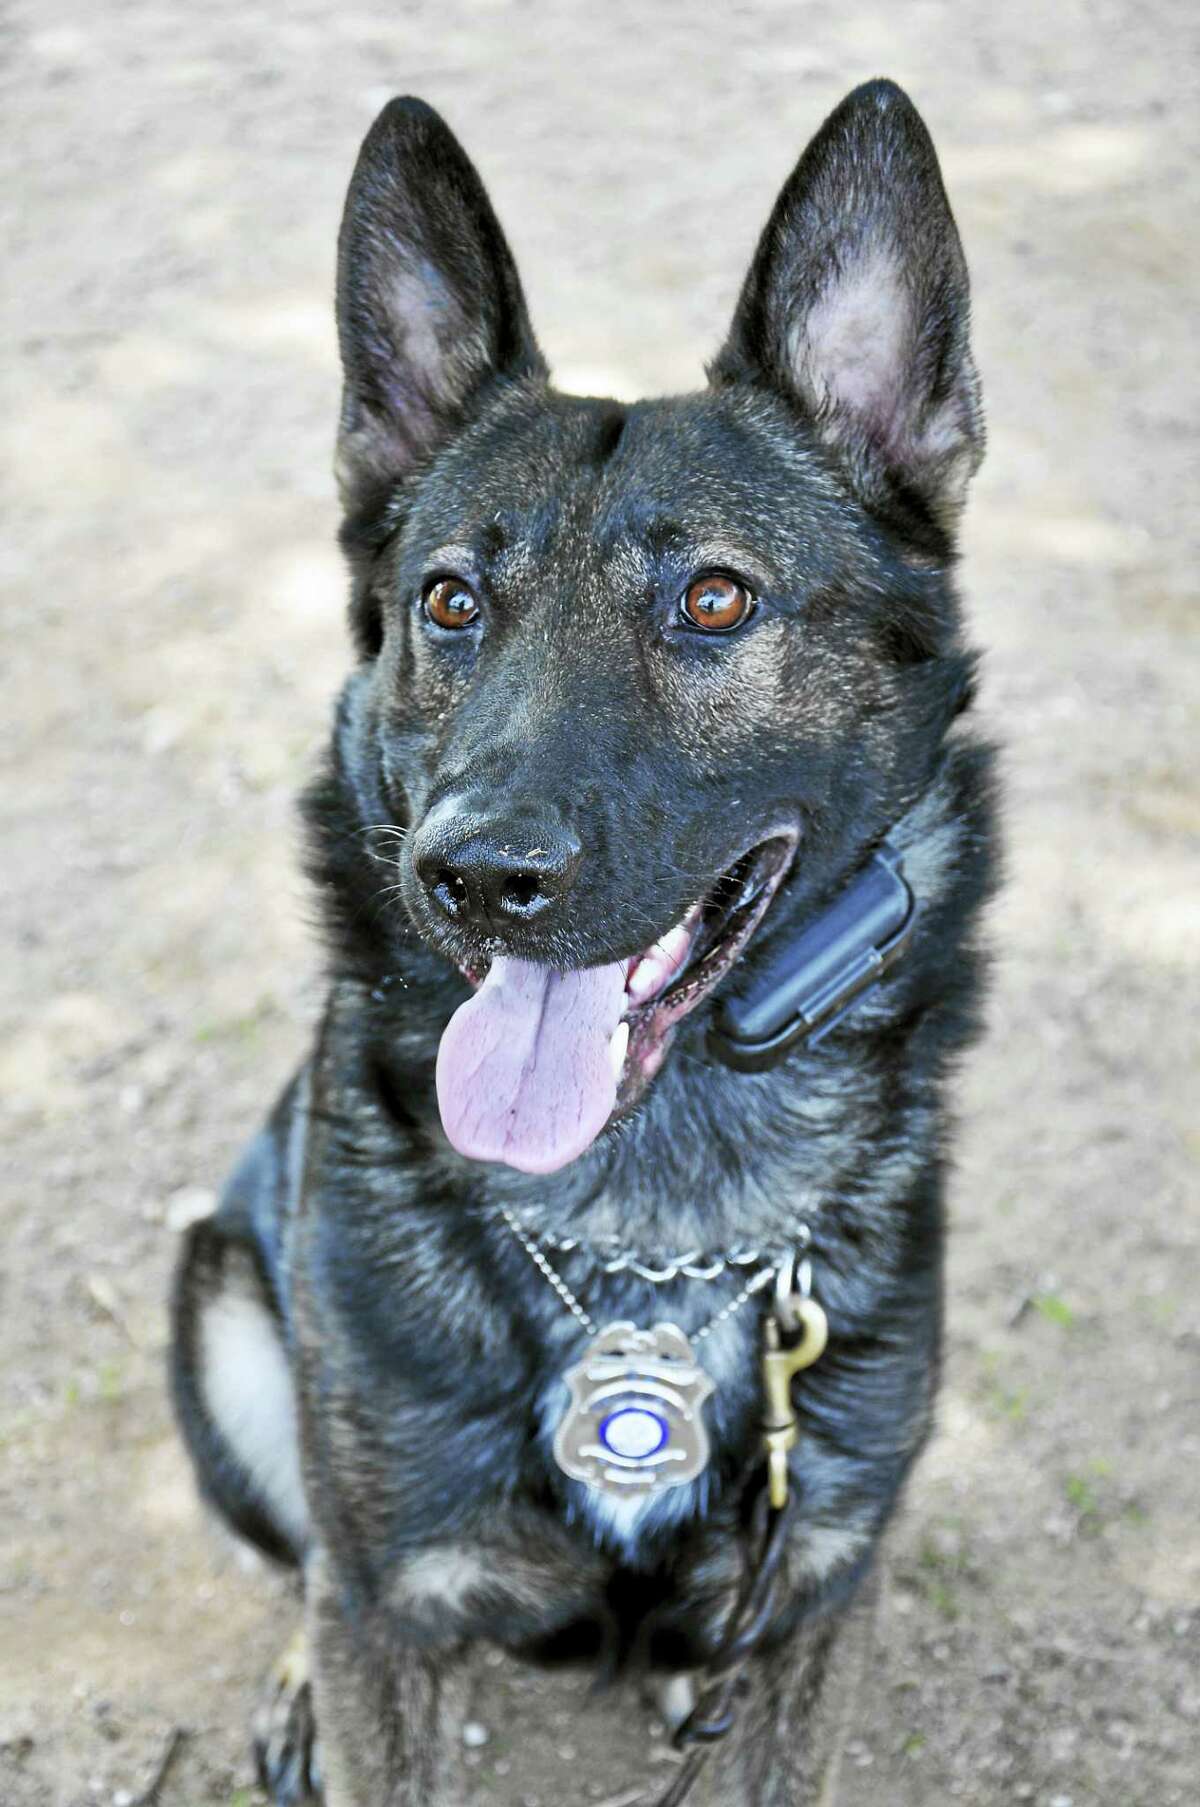 Canine officer Chino recently retired from his police post.